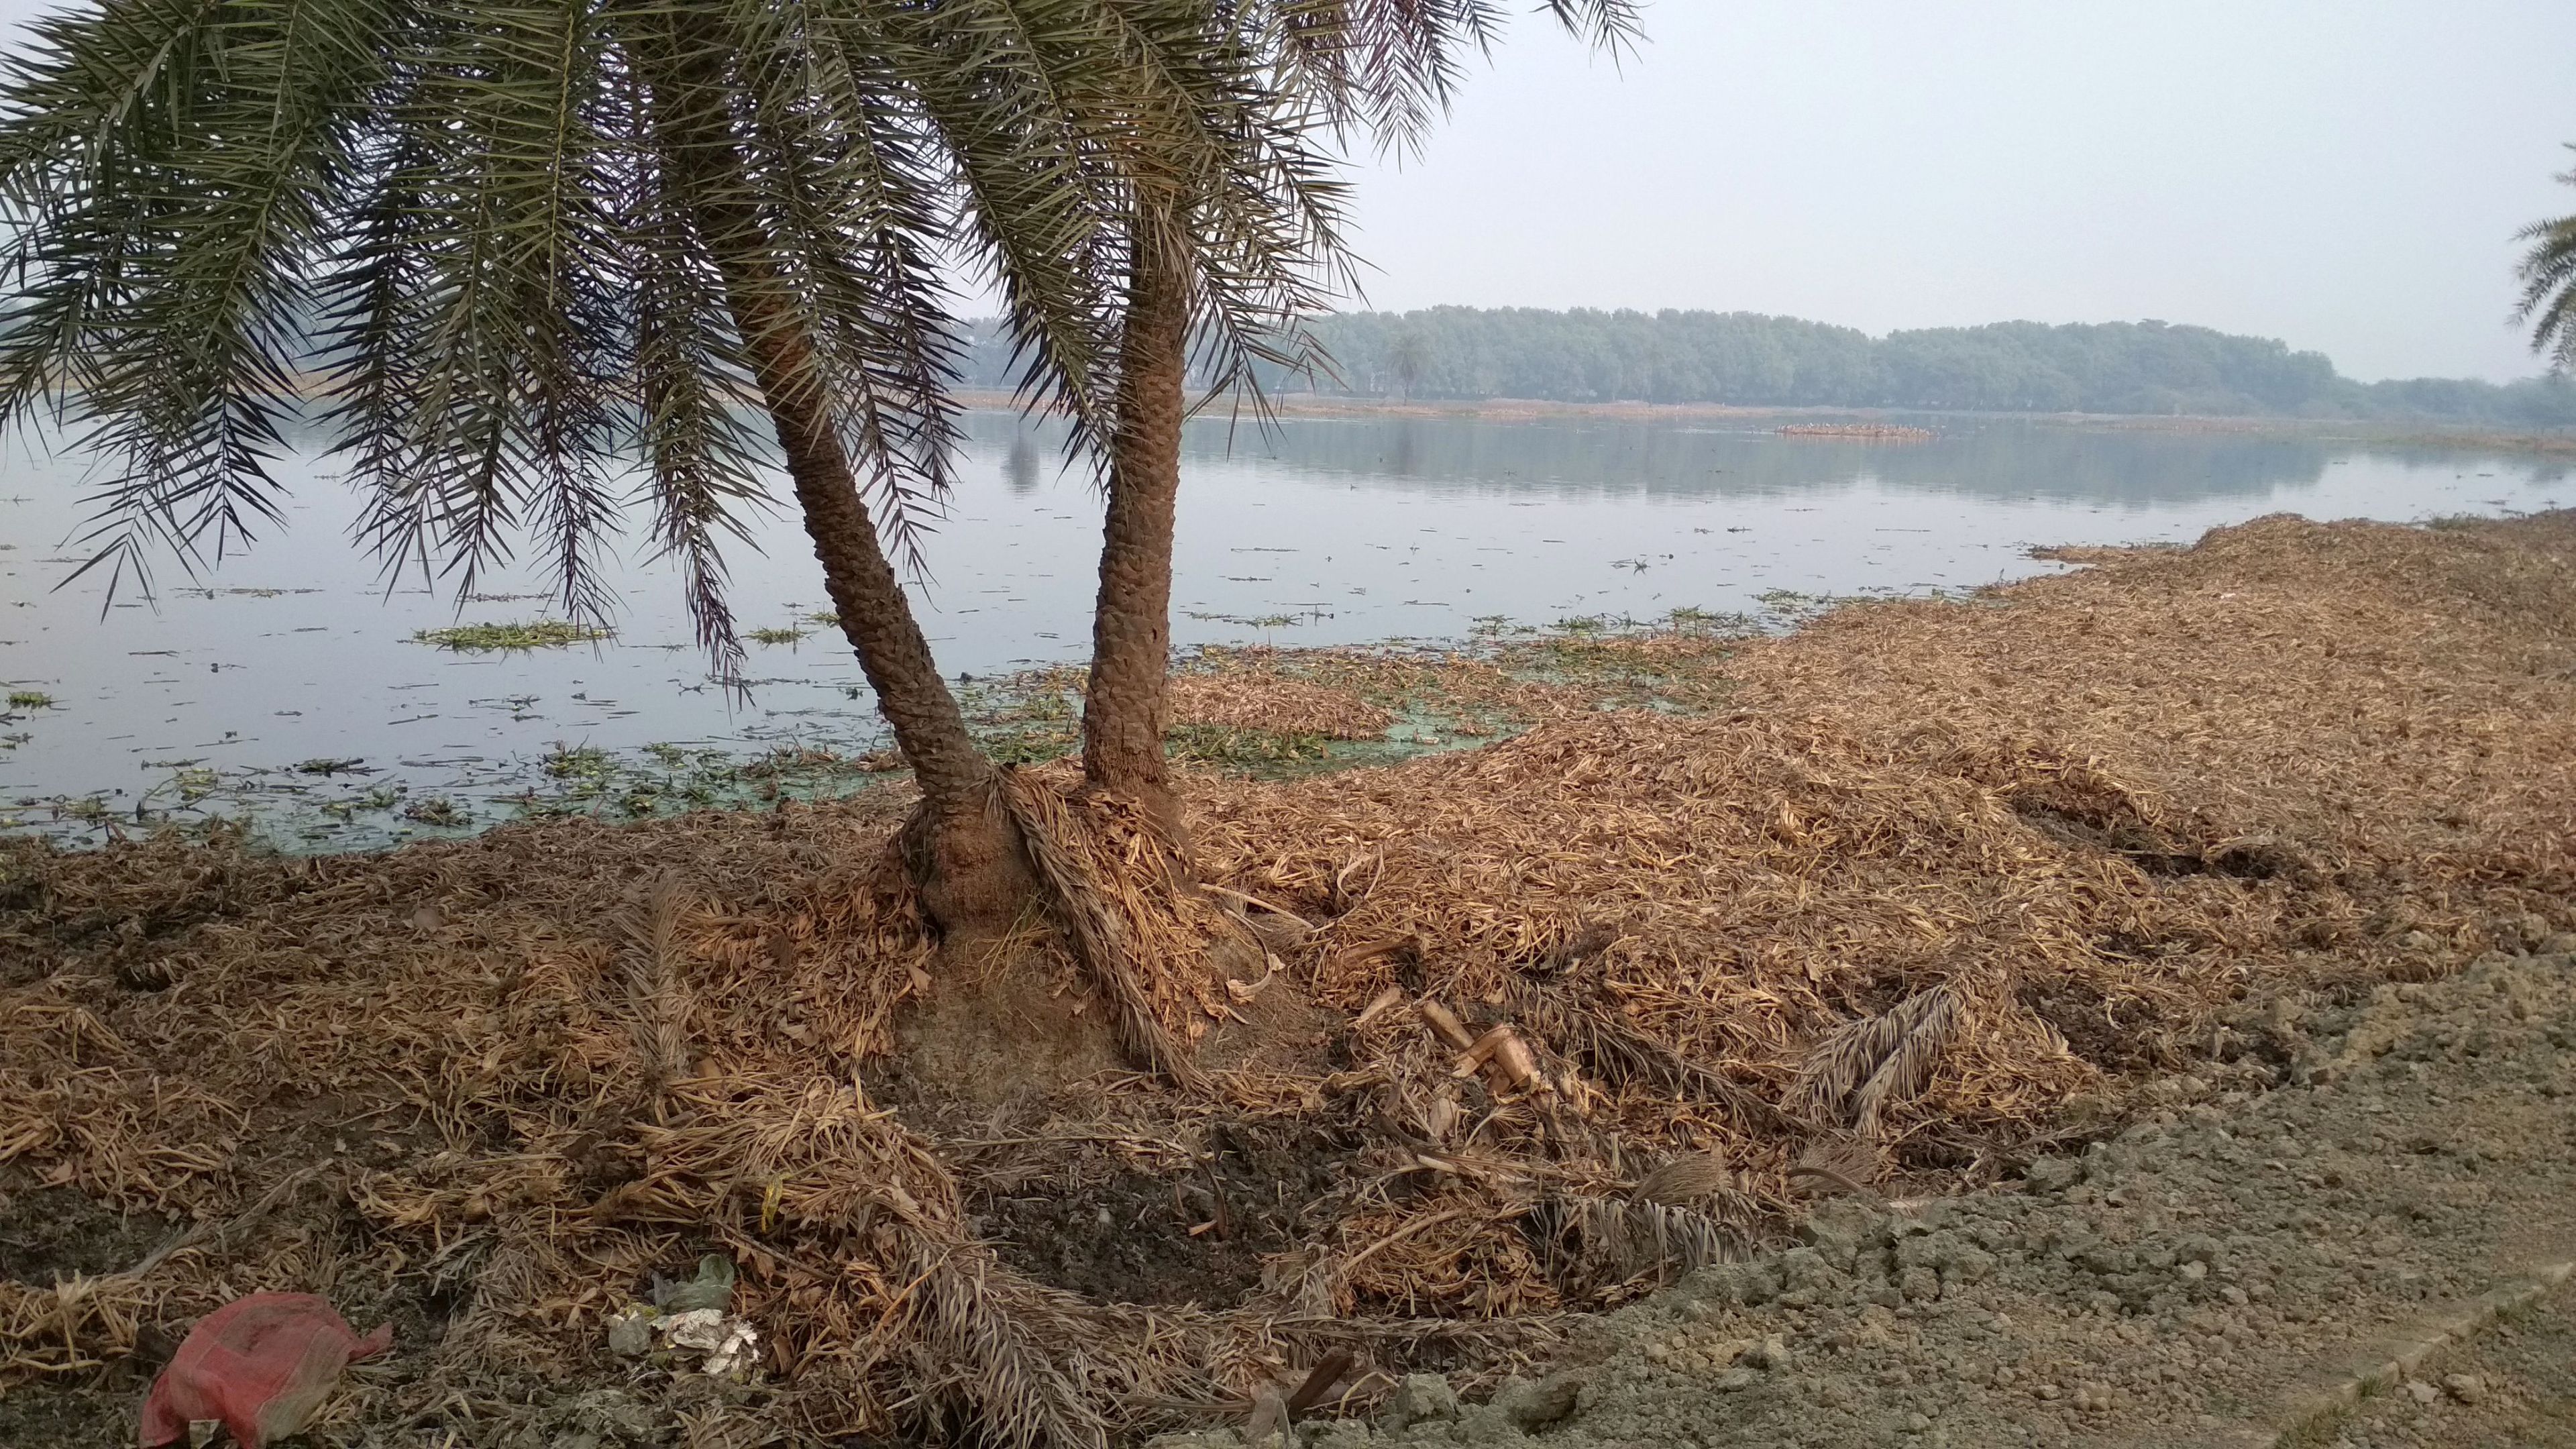 The wetland is faced with pressures due to the rapidly urbanising areas nearby, especially various real estate projects. (Image: India Water Portal)